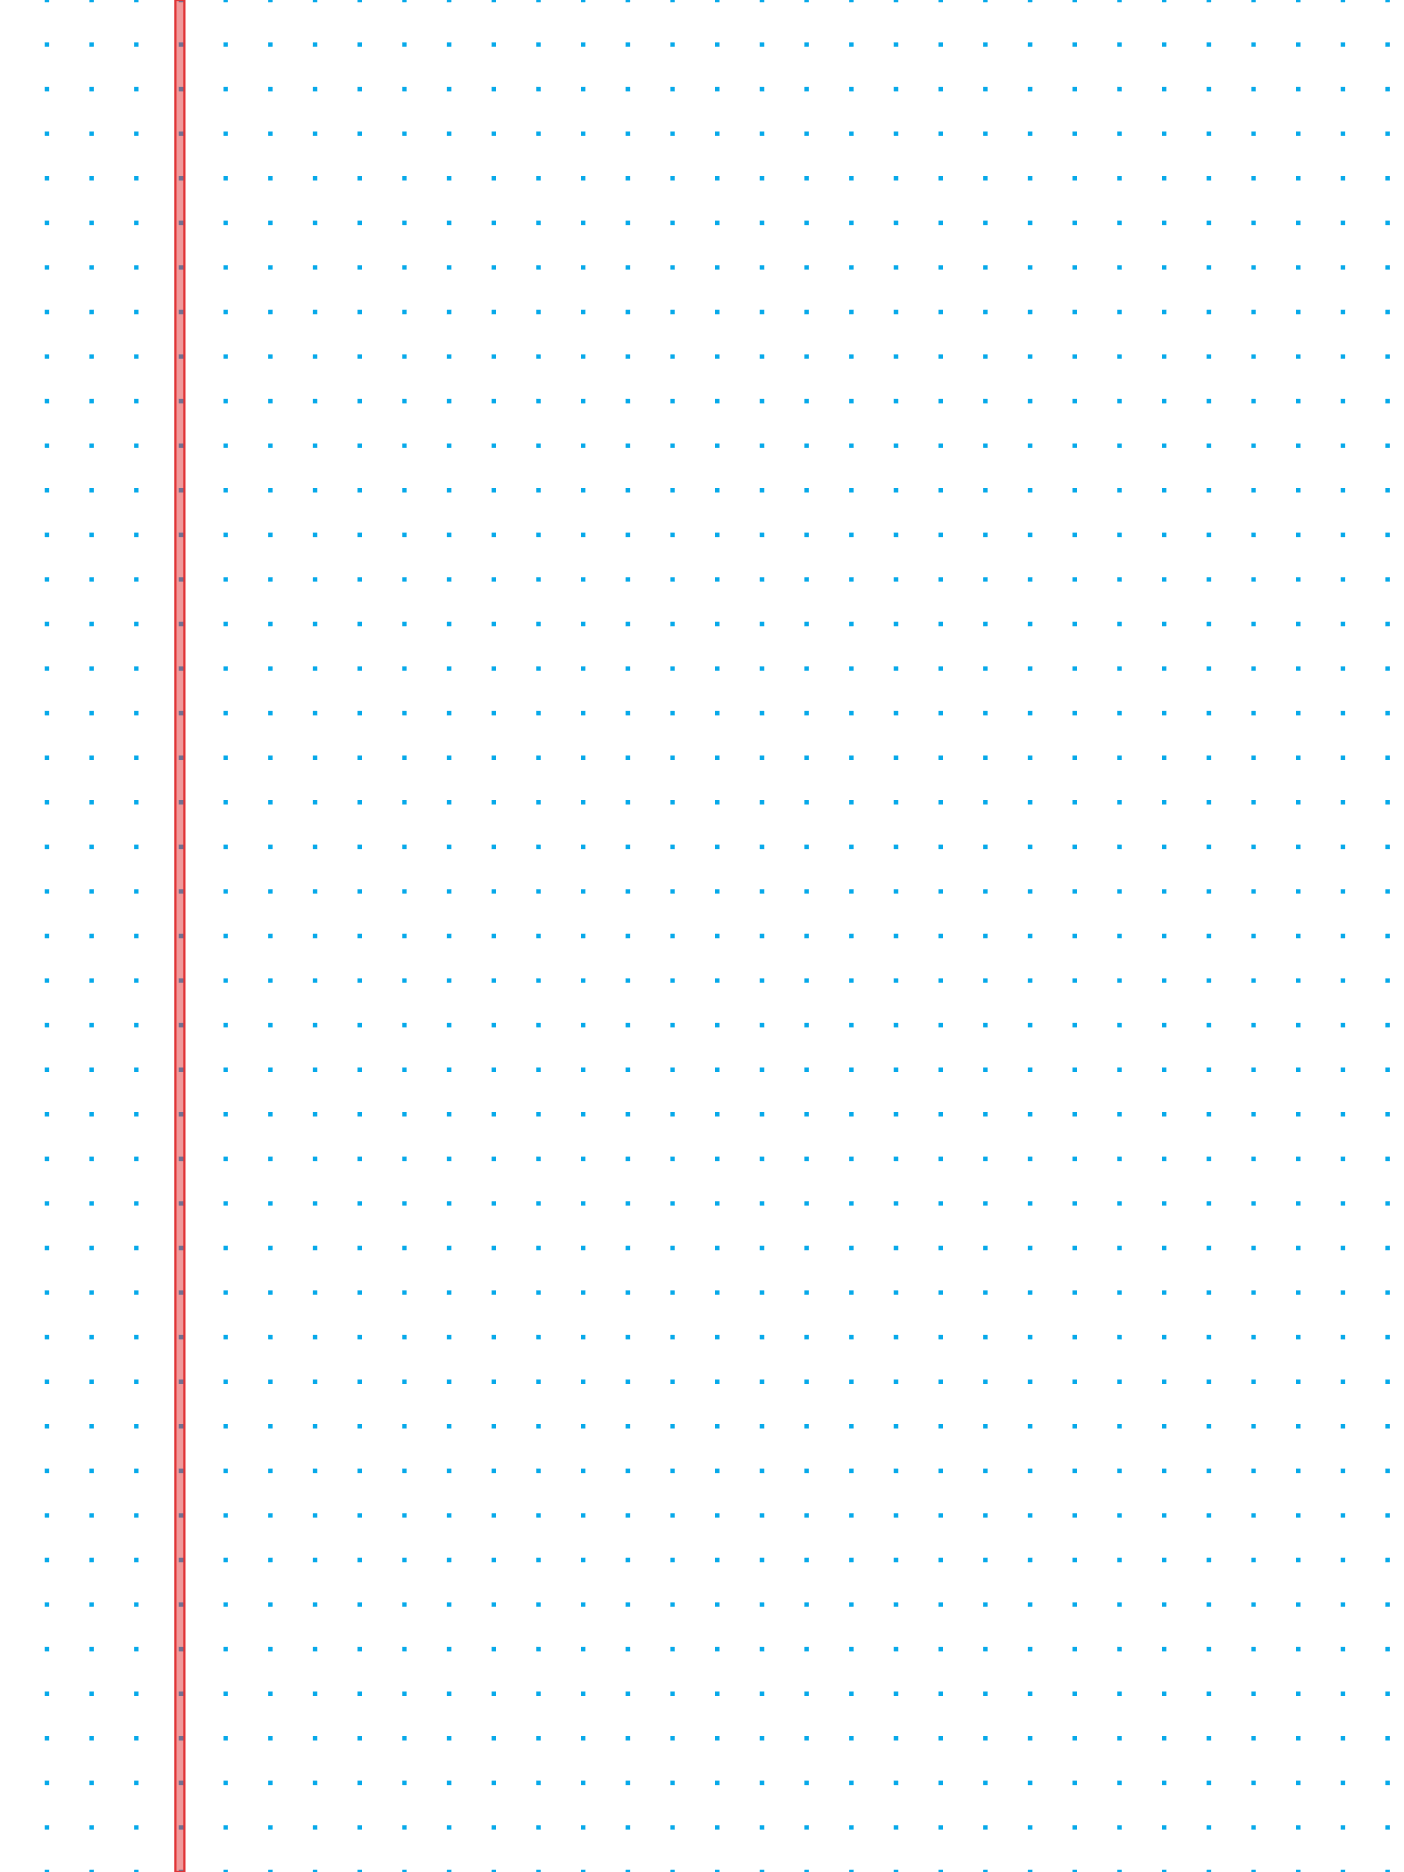 5 mm dotted grid at 227 DPI - with a thick half-transparent margin line - 1404x1872.png